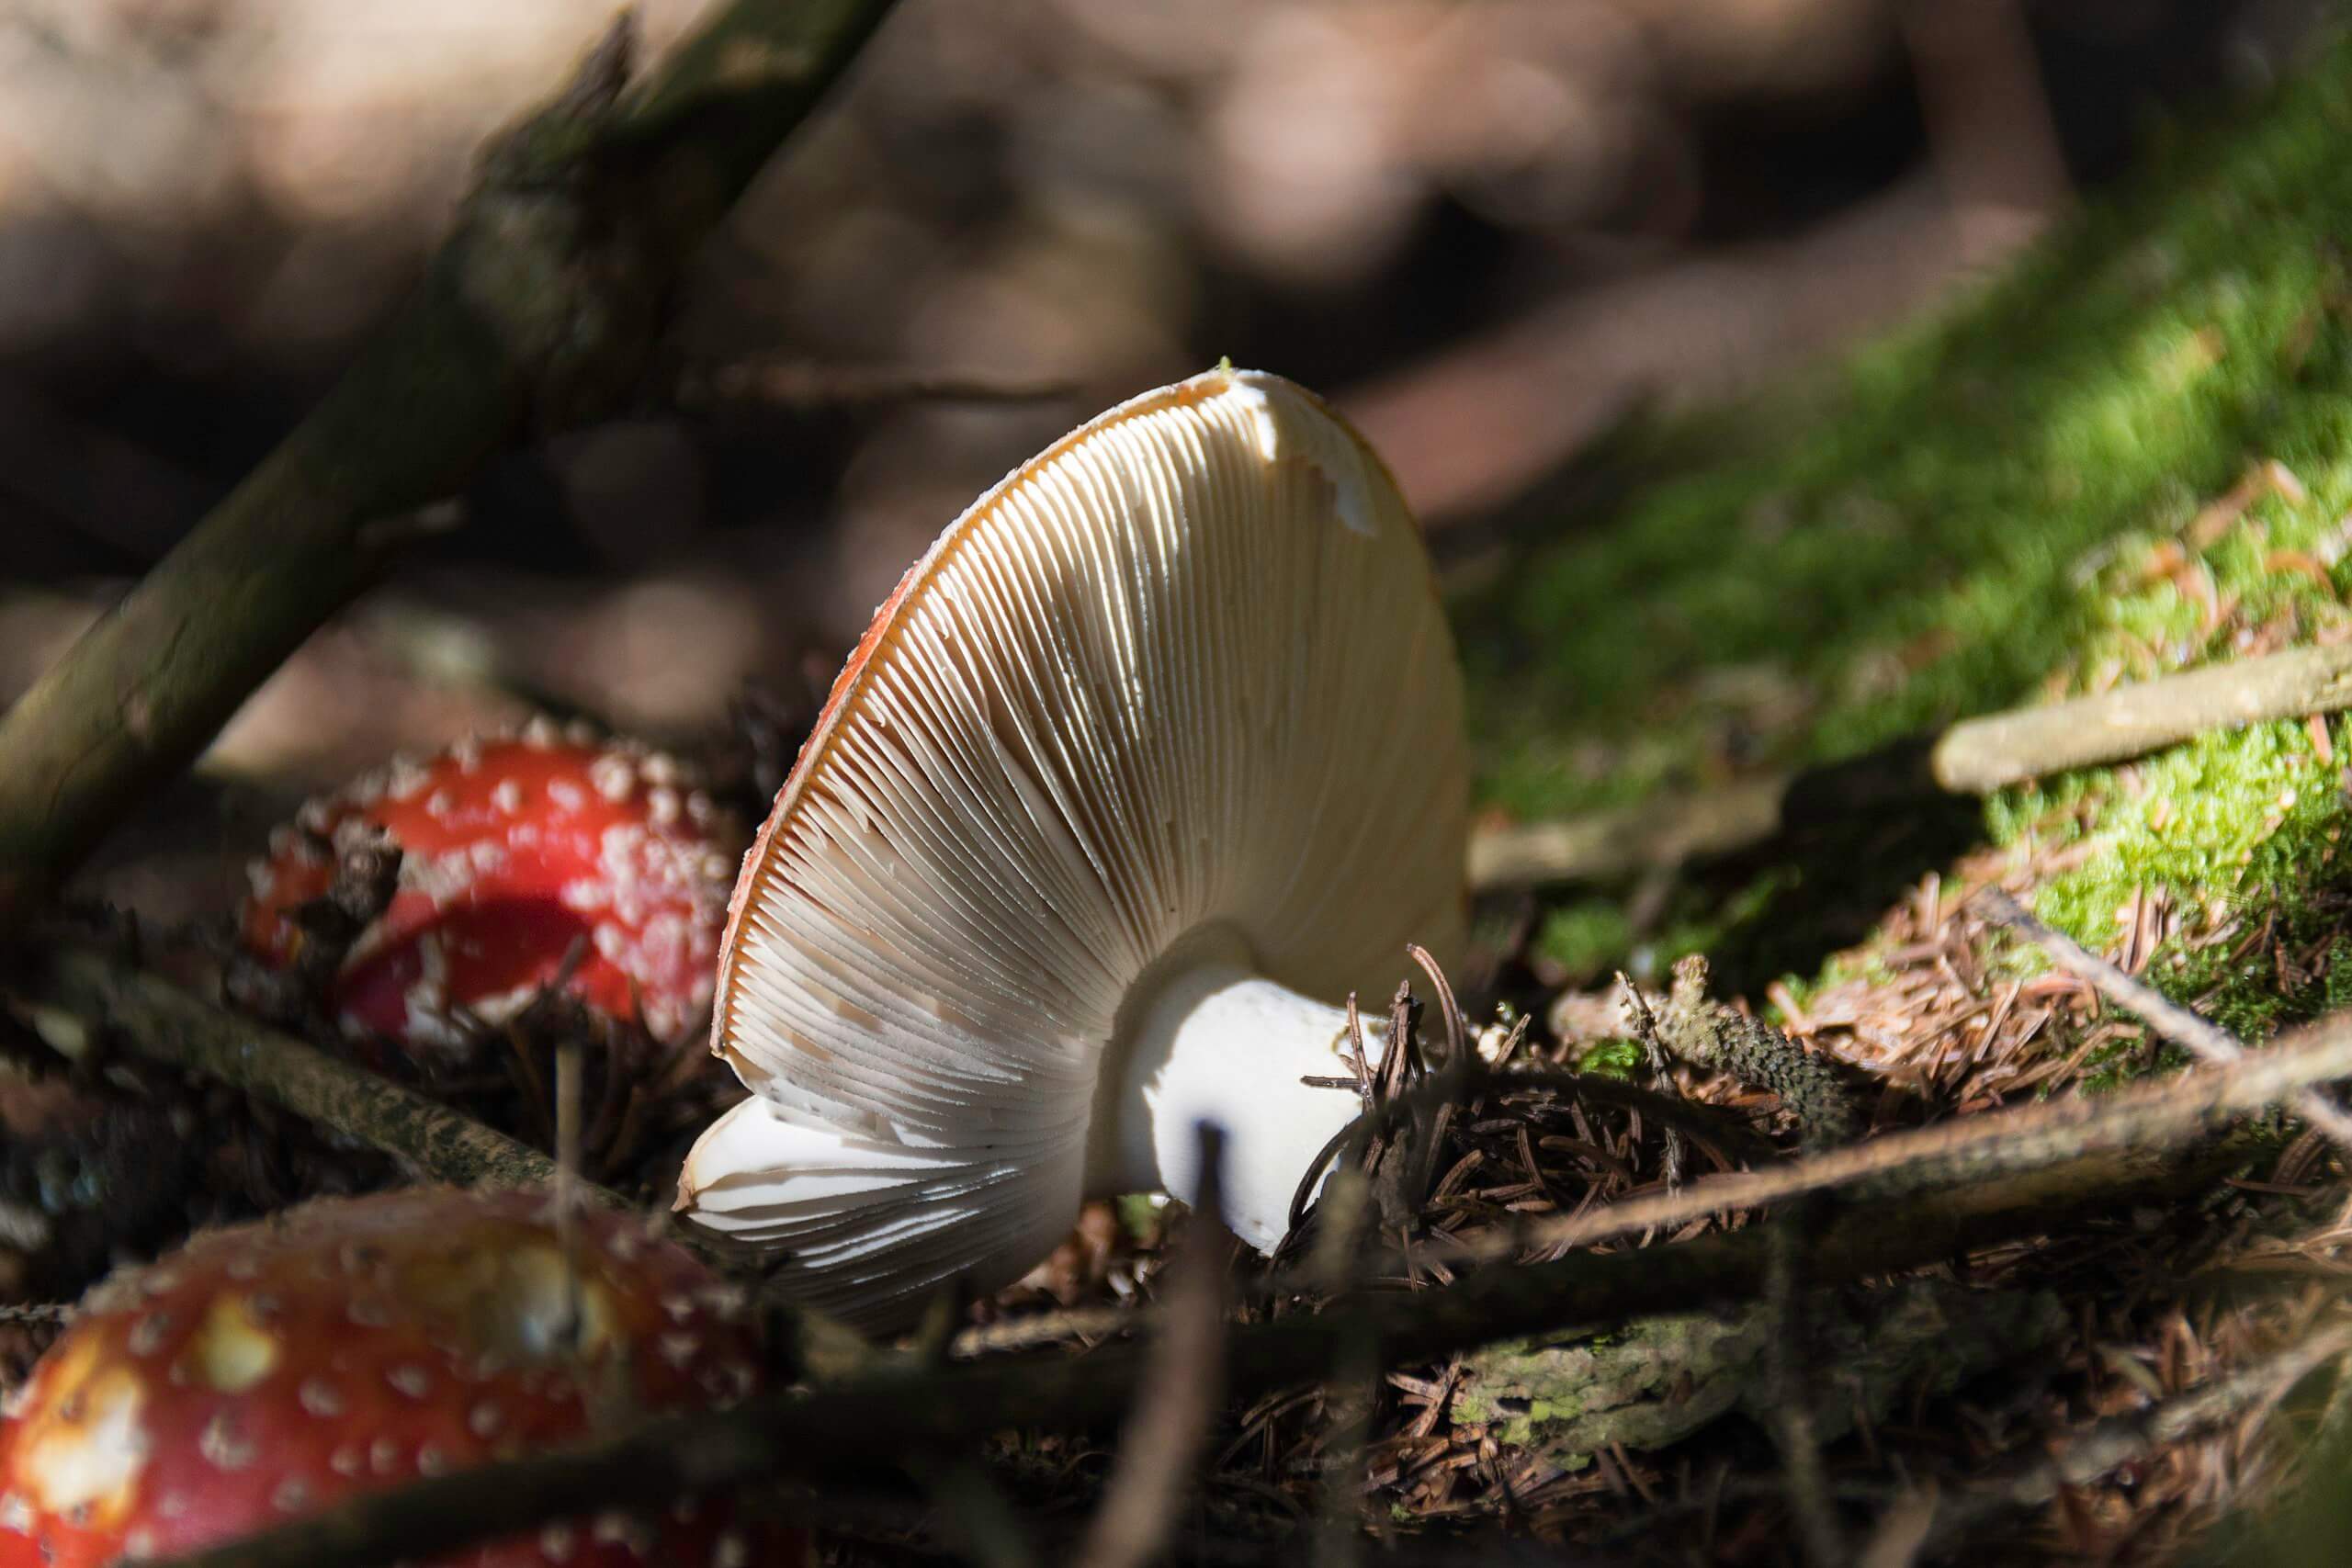 The gills of the Fly Agaric